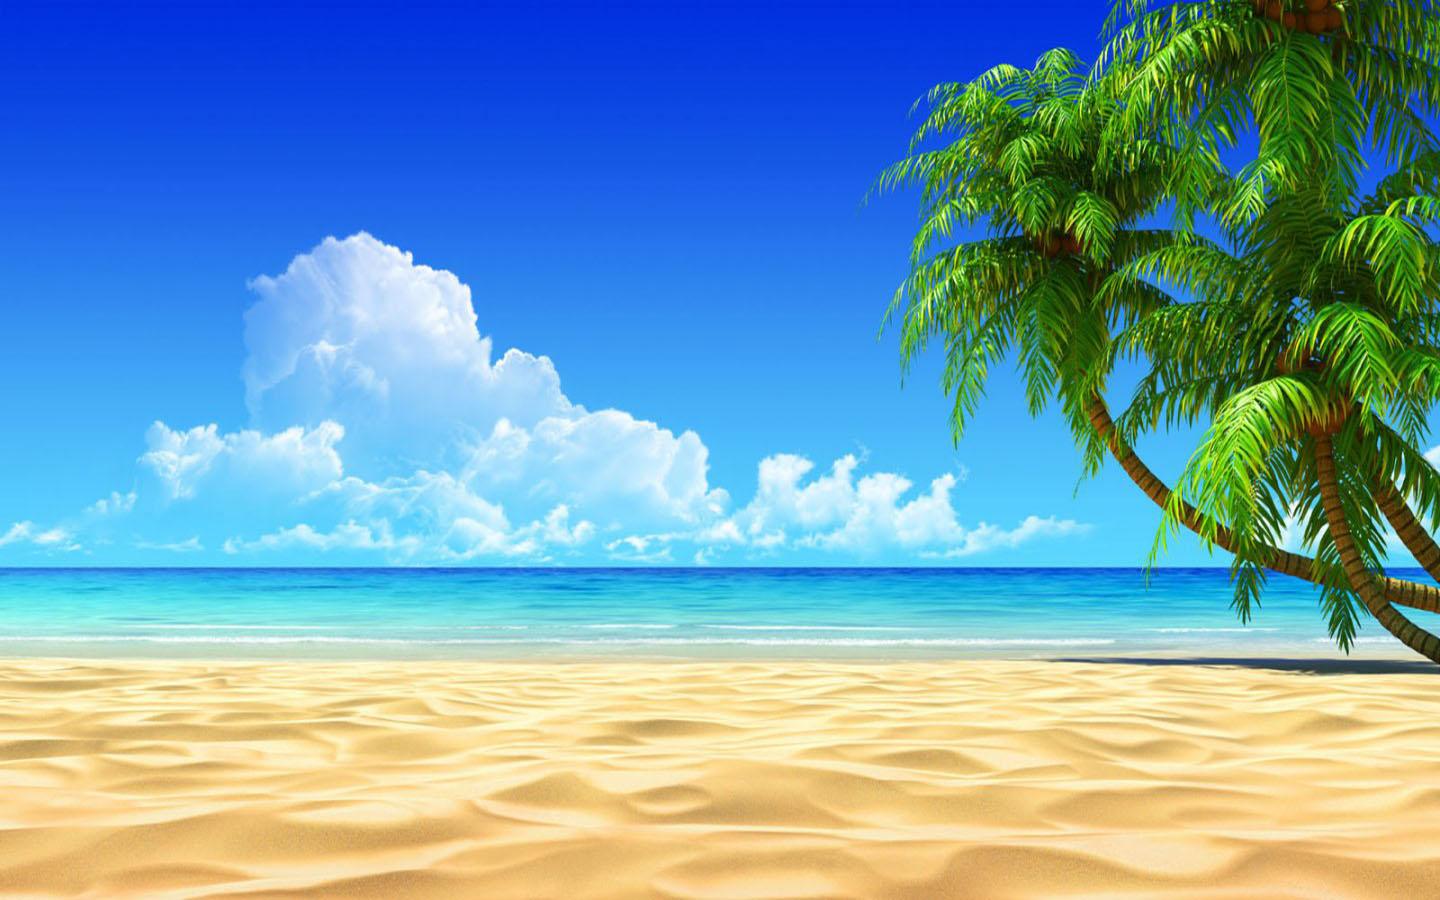 Summer Beach Wallpaper Android Apps On Google Play